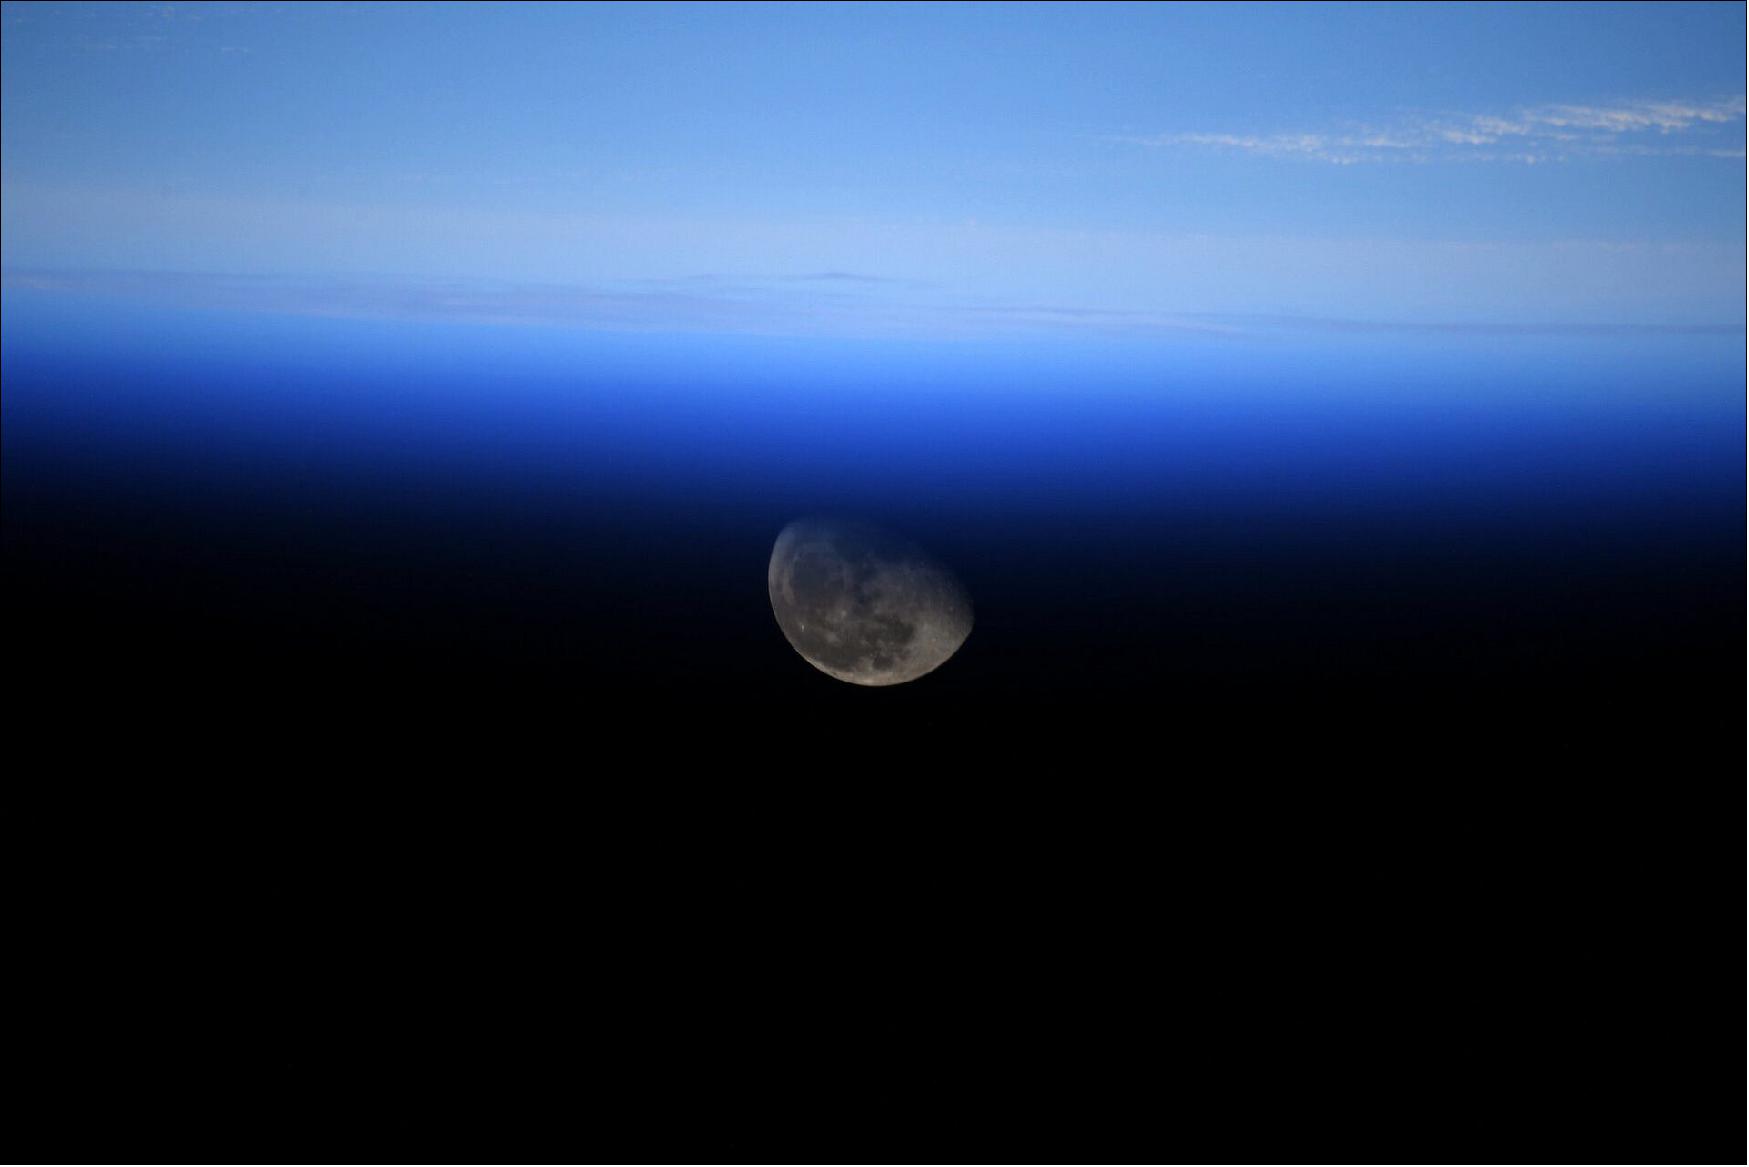 Figure 38: The Moon seen from the International Space Station by ESA astronaut Thomas Pesquet on 30 May 2021 (image credit: ESA/NASA–T. Pesquet)